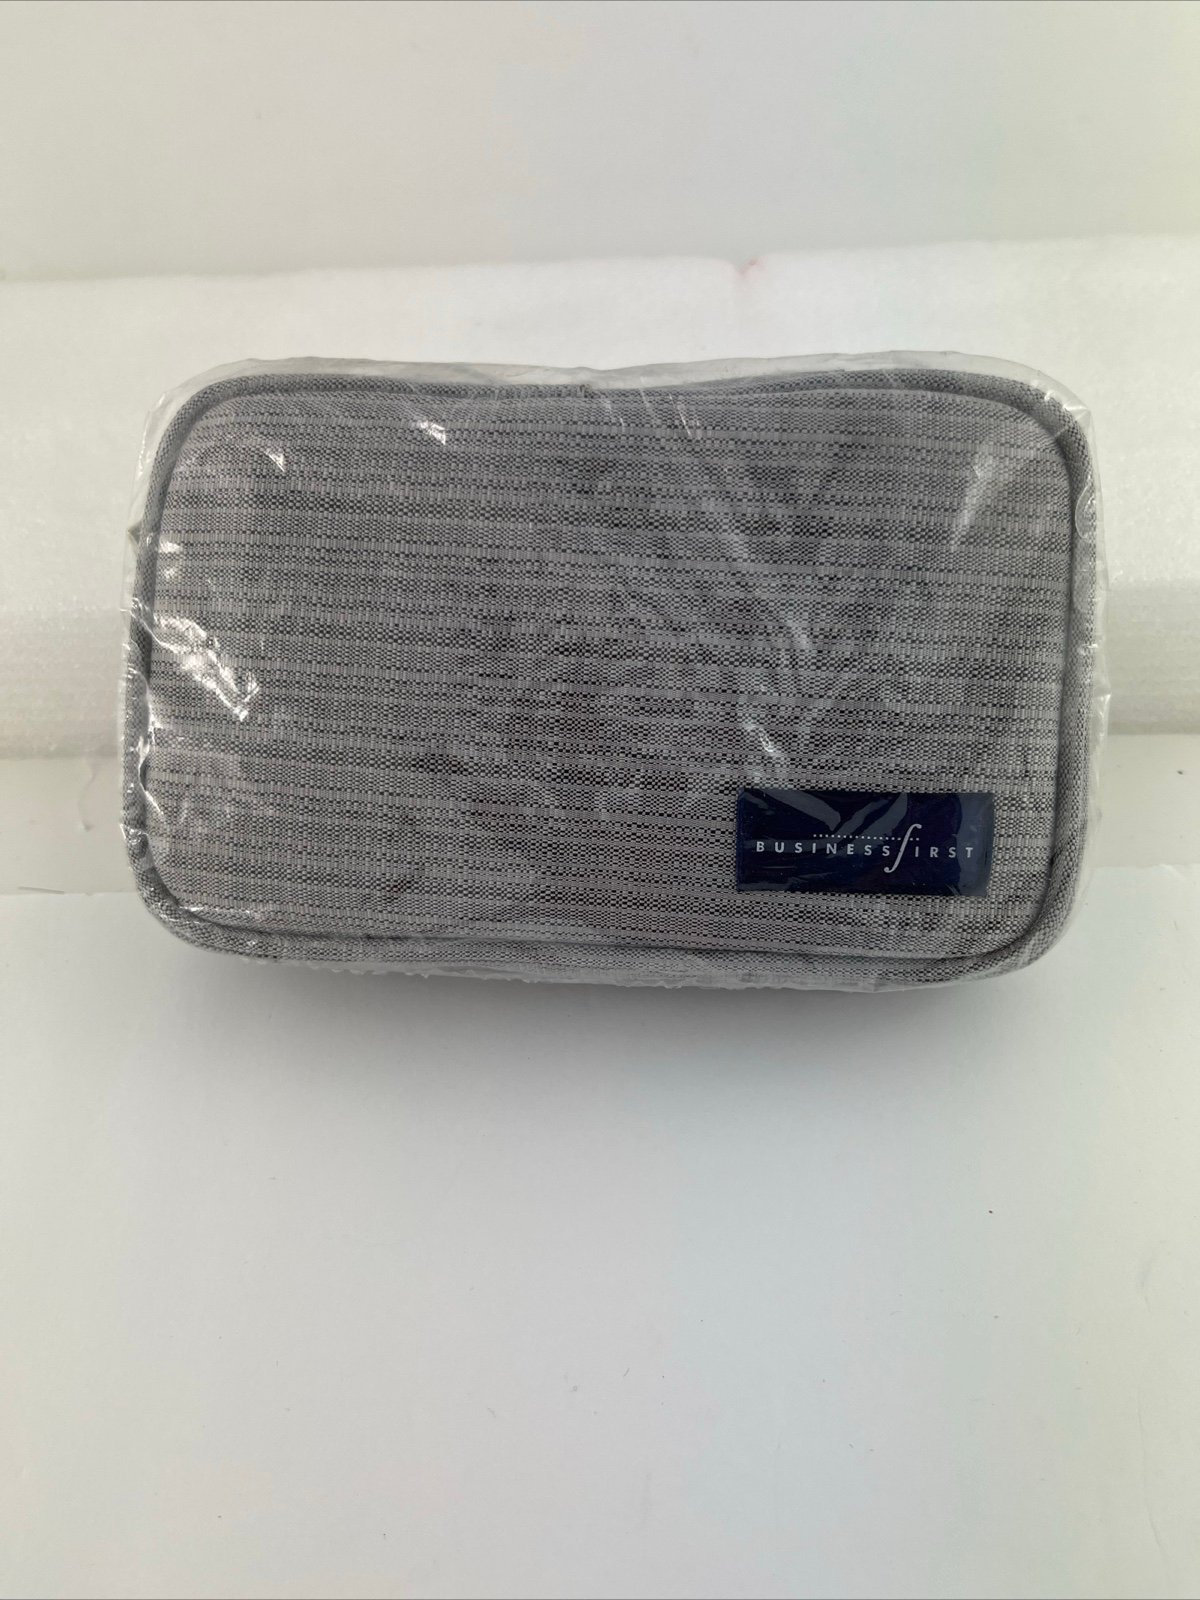 Continental Airlines First Class Complimentary Amenity Kit 5 VTG Travel Bag New BUxgR6dLT